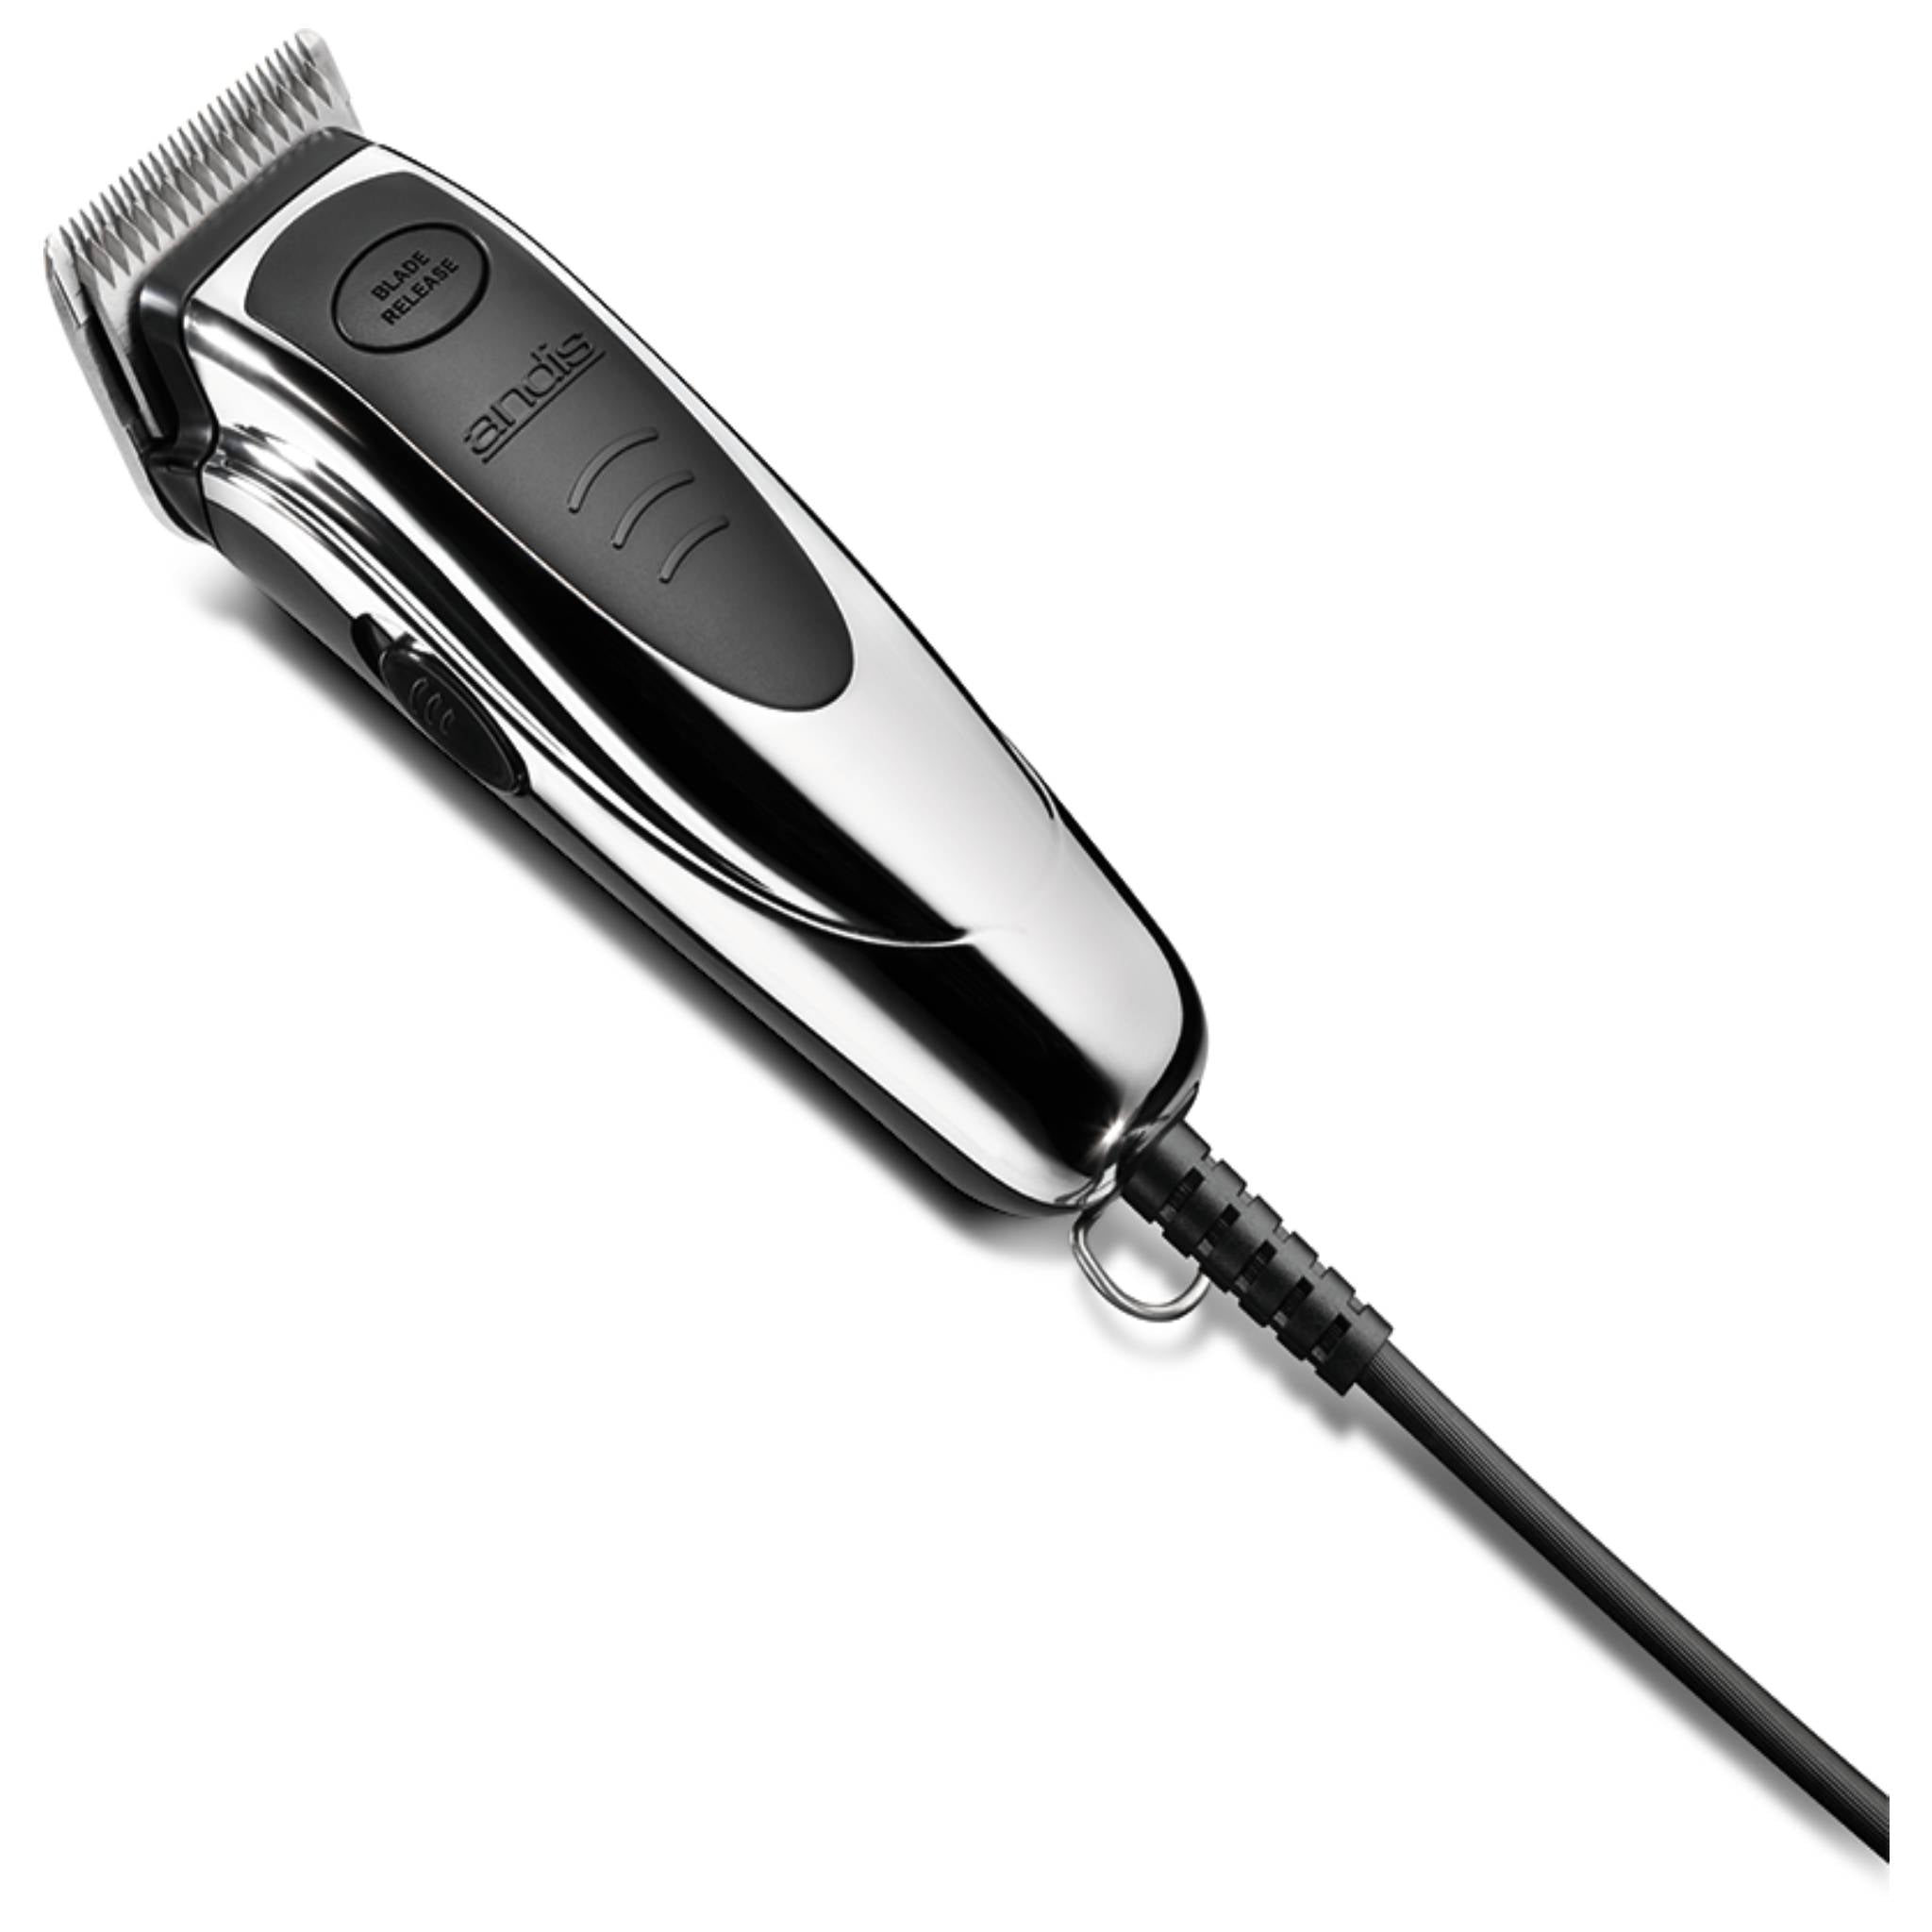 Andis RACD Powerful, Detachable Blade Clipper - Silver